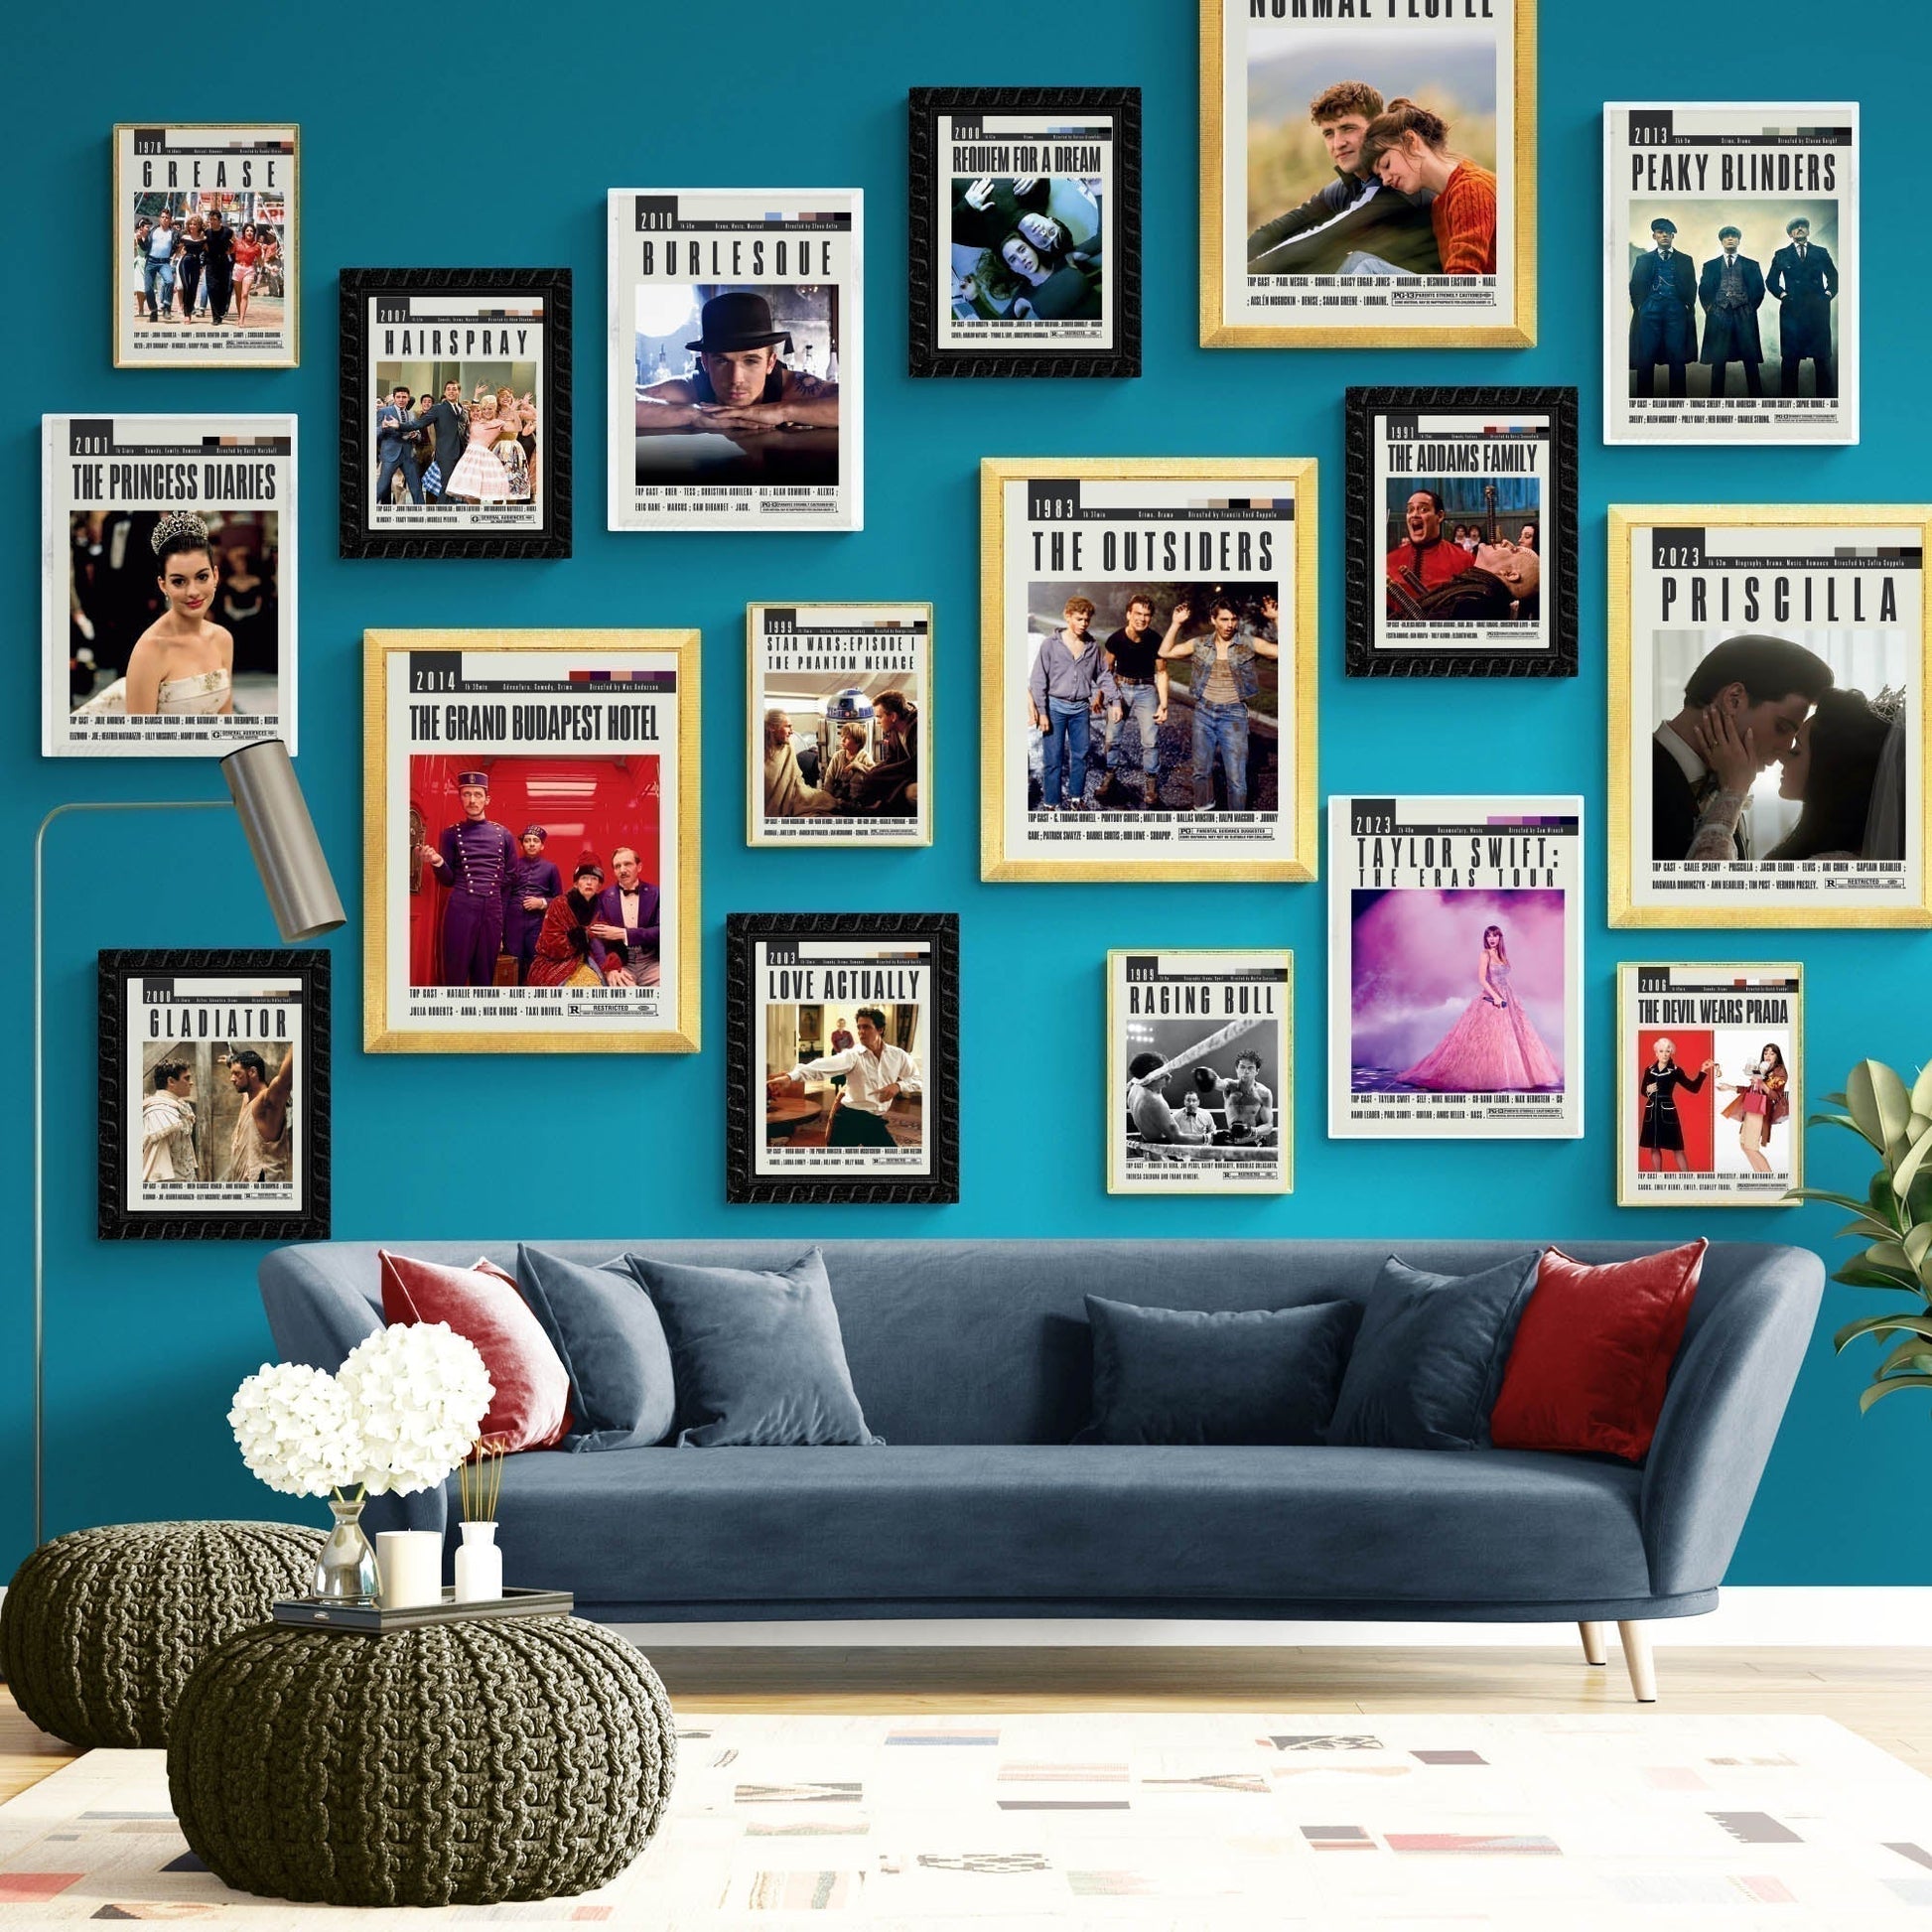 Immerse yourself in nostalgia with our collection of original movie posters from iconic director Richard Linklater. Featuring vintage and minimalist designs, these large posters will elevate your home decor. Available in various sizes, from A6 to A3, our posters will add a touch of mid-century style to your space.